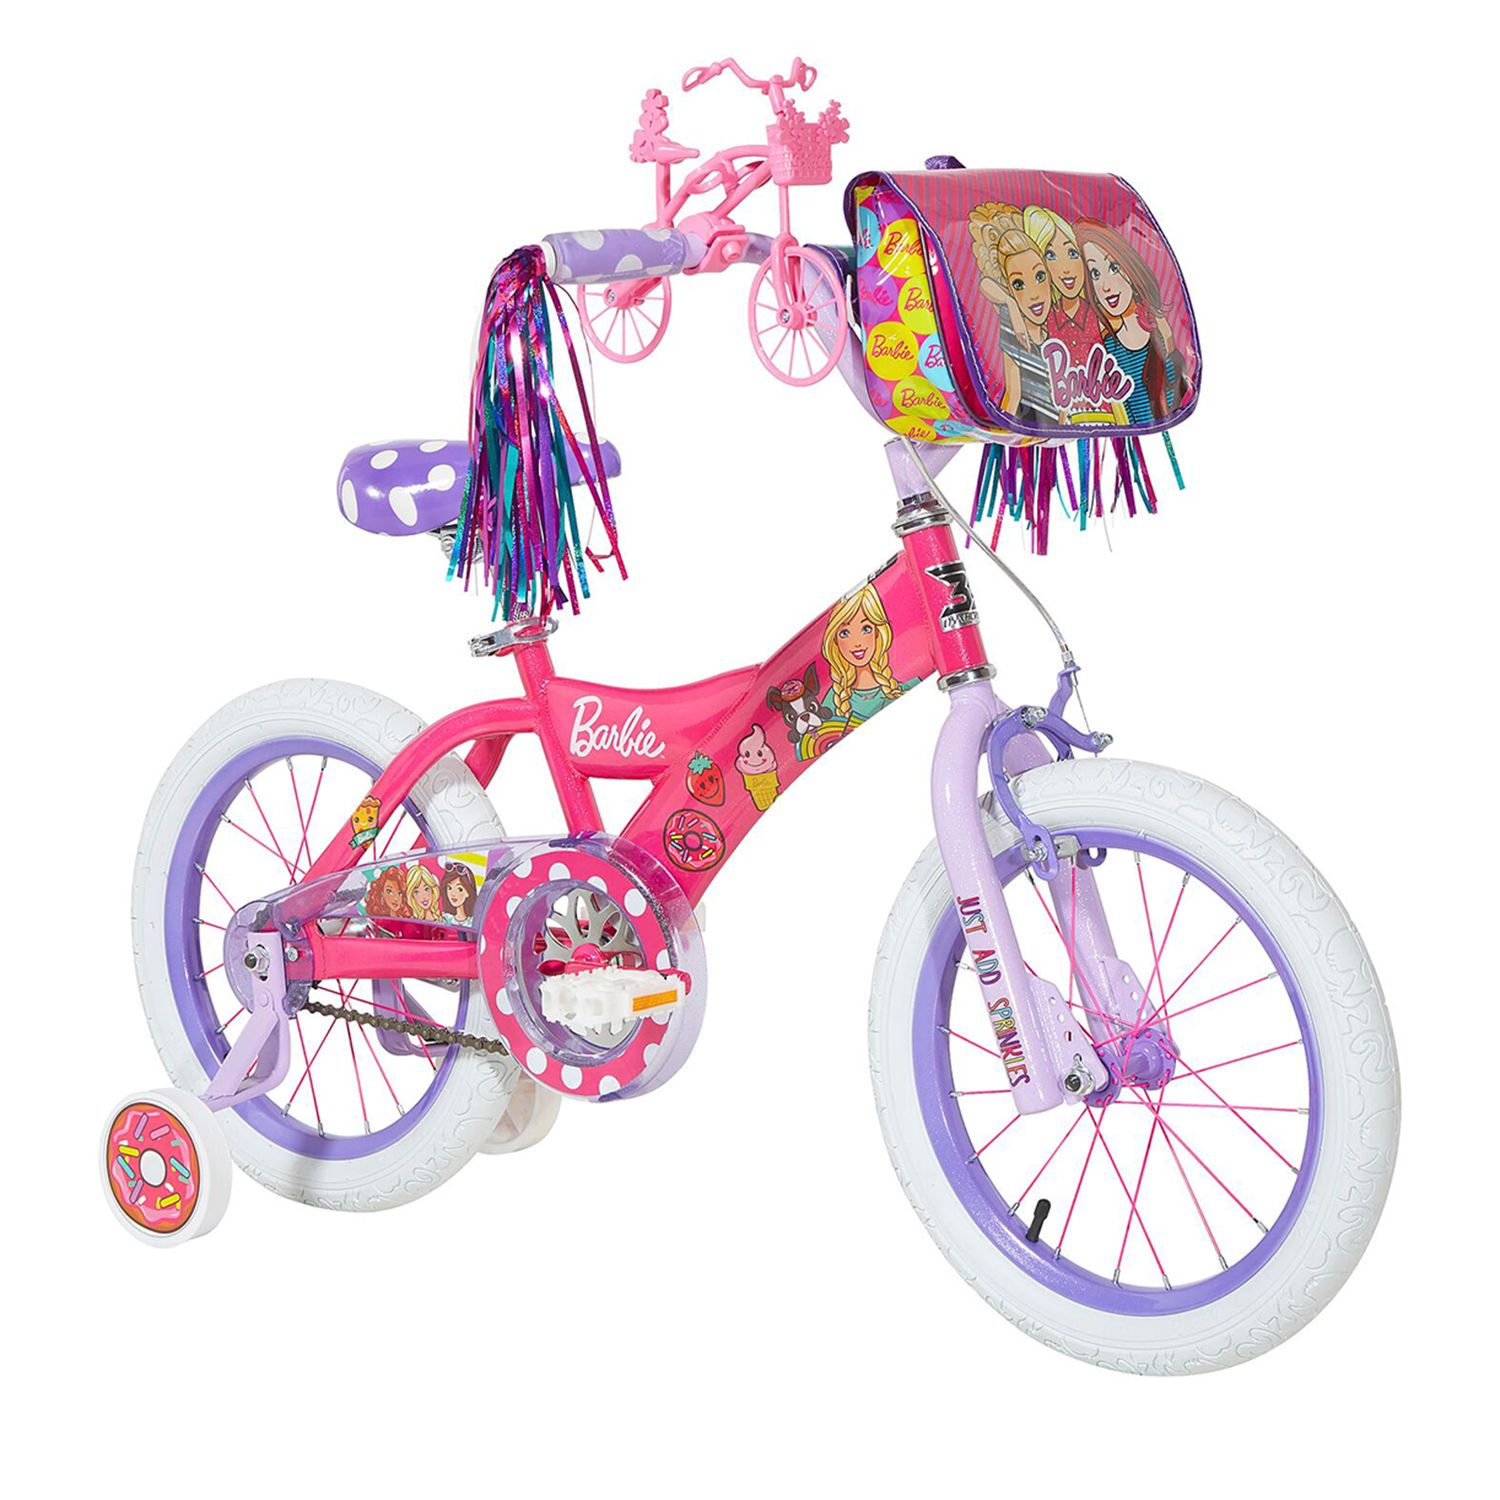 bicycle with training wheels